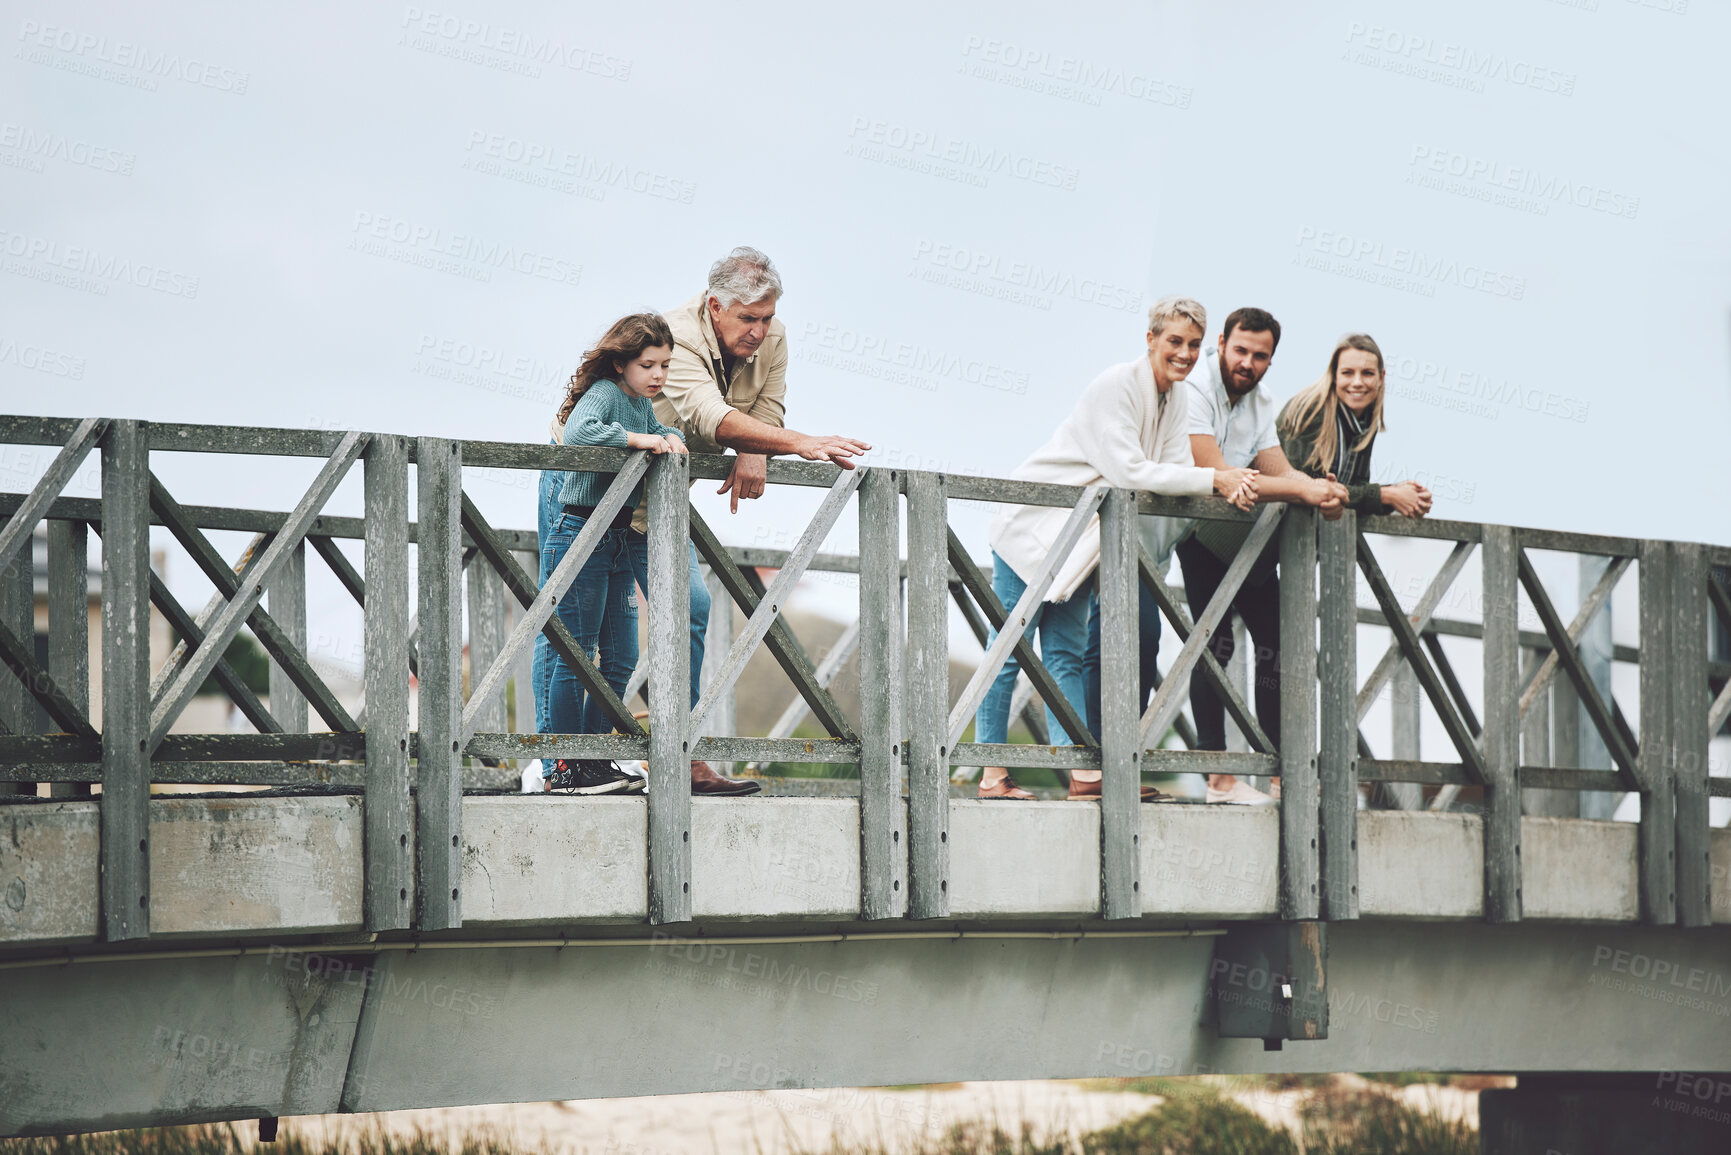 Buy stock photo Big family, bridge and happy travel, vacation or holiday trip together outdoors. Family, generations and mom, dad and girl, grandma and grandpa spending time together, love and bonding in Canada.

